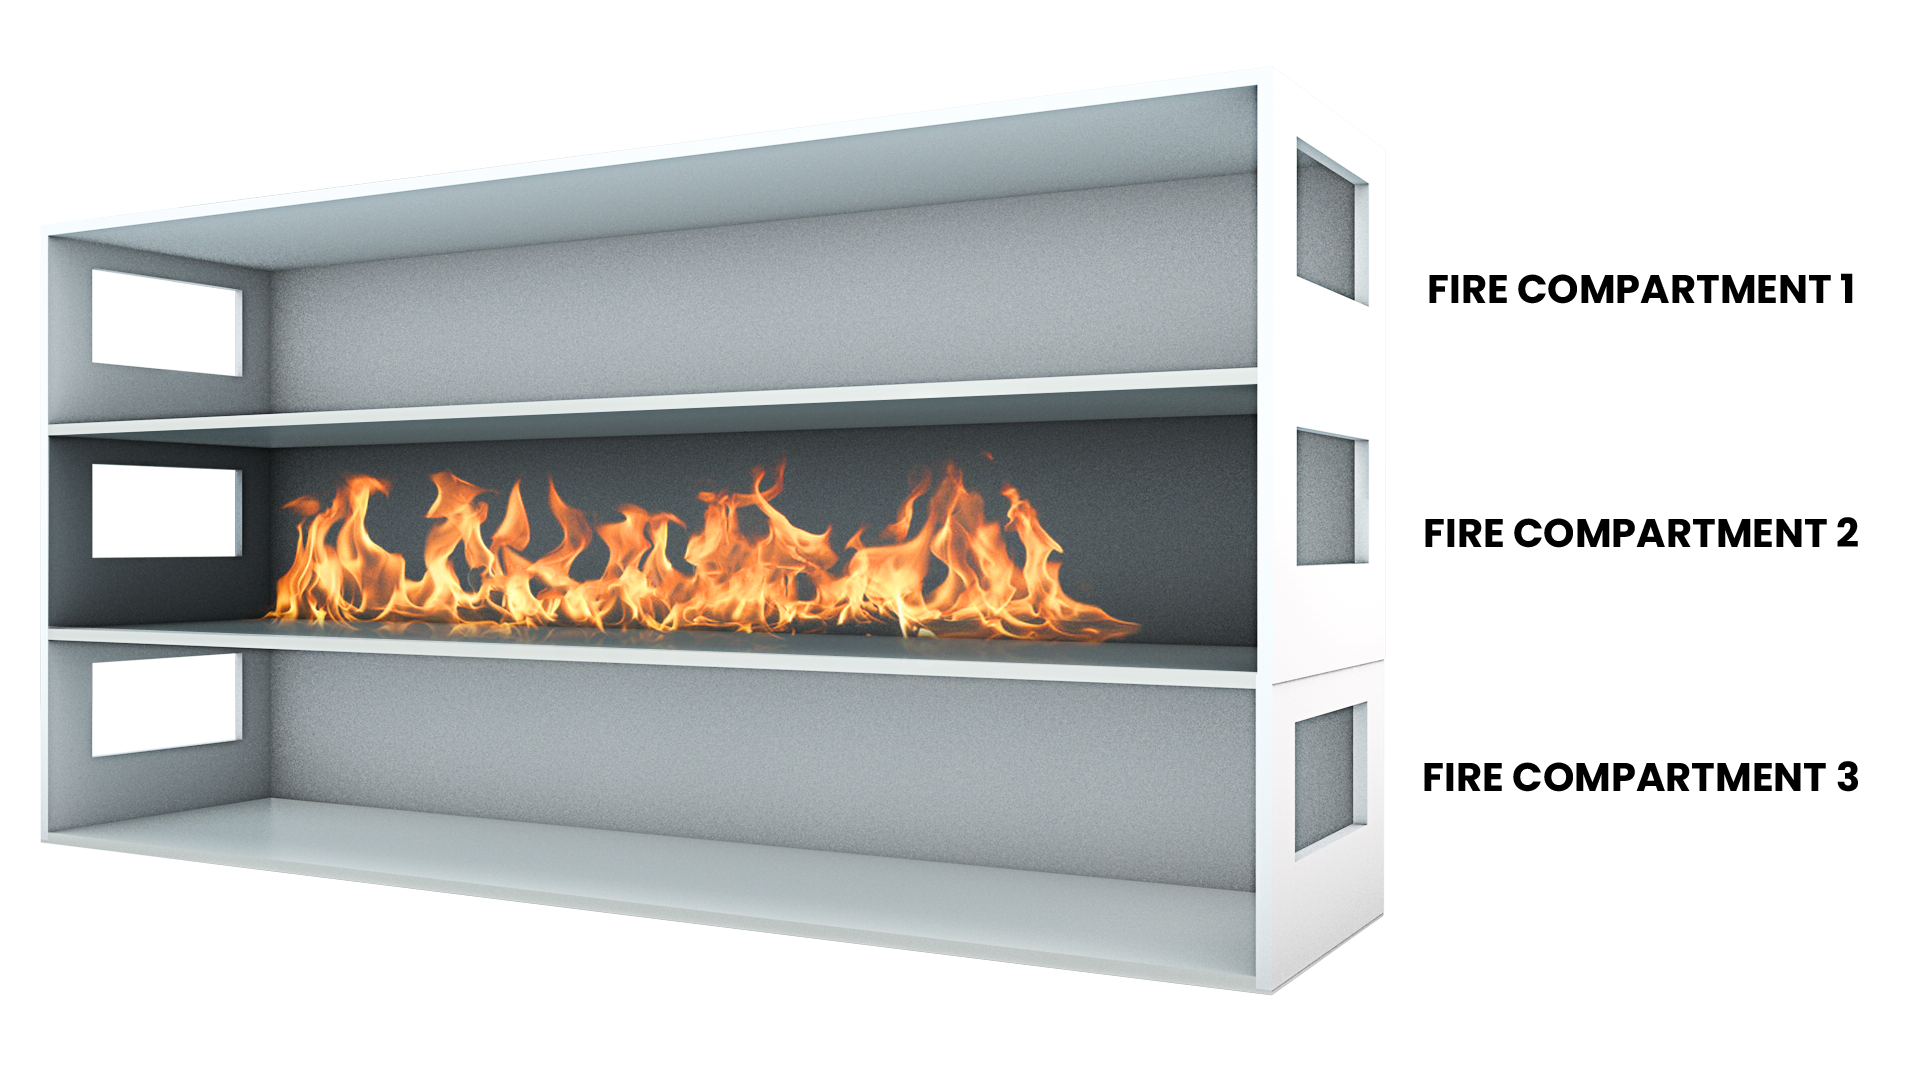 Compartmentalisation Passive Fire Protection